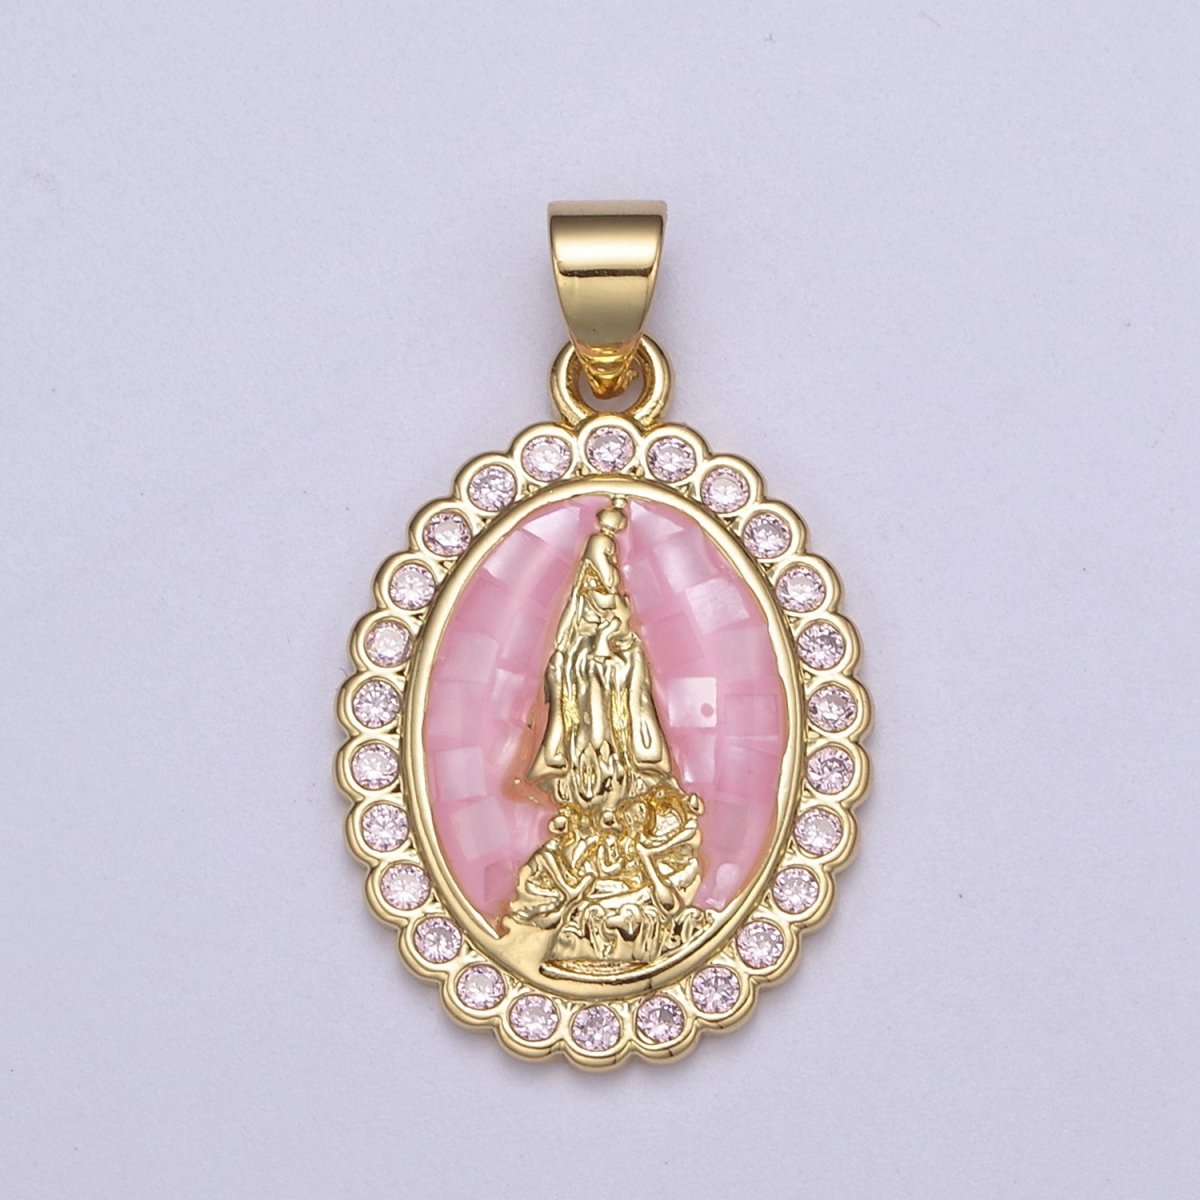 Pink Opal Miraculous Lady Charm for Necklace, Dainty Lady of Guadalupe Pendant for Religious Jewelry Making Supply in Gold Filled H-601 - DLUXCA